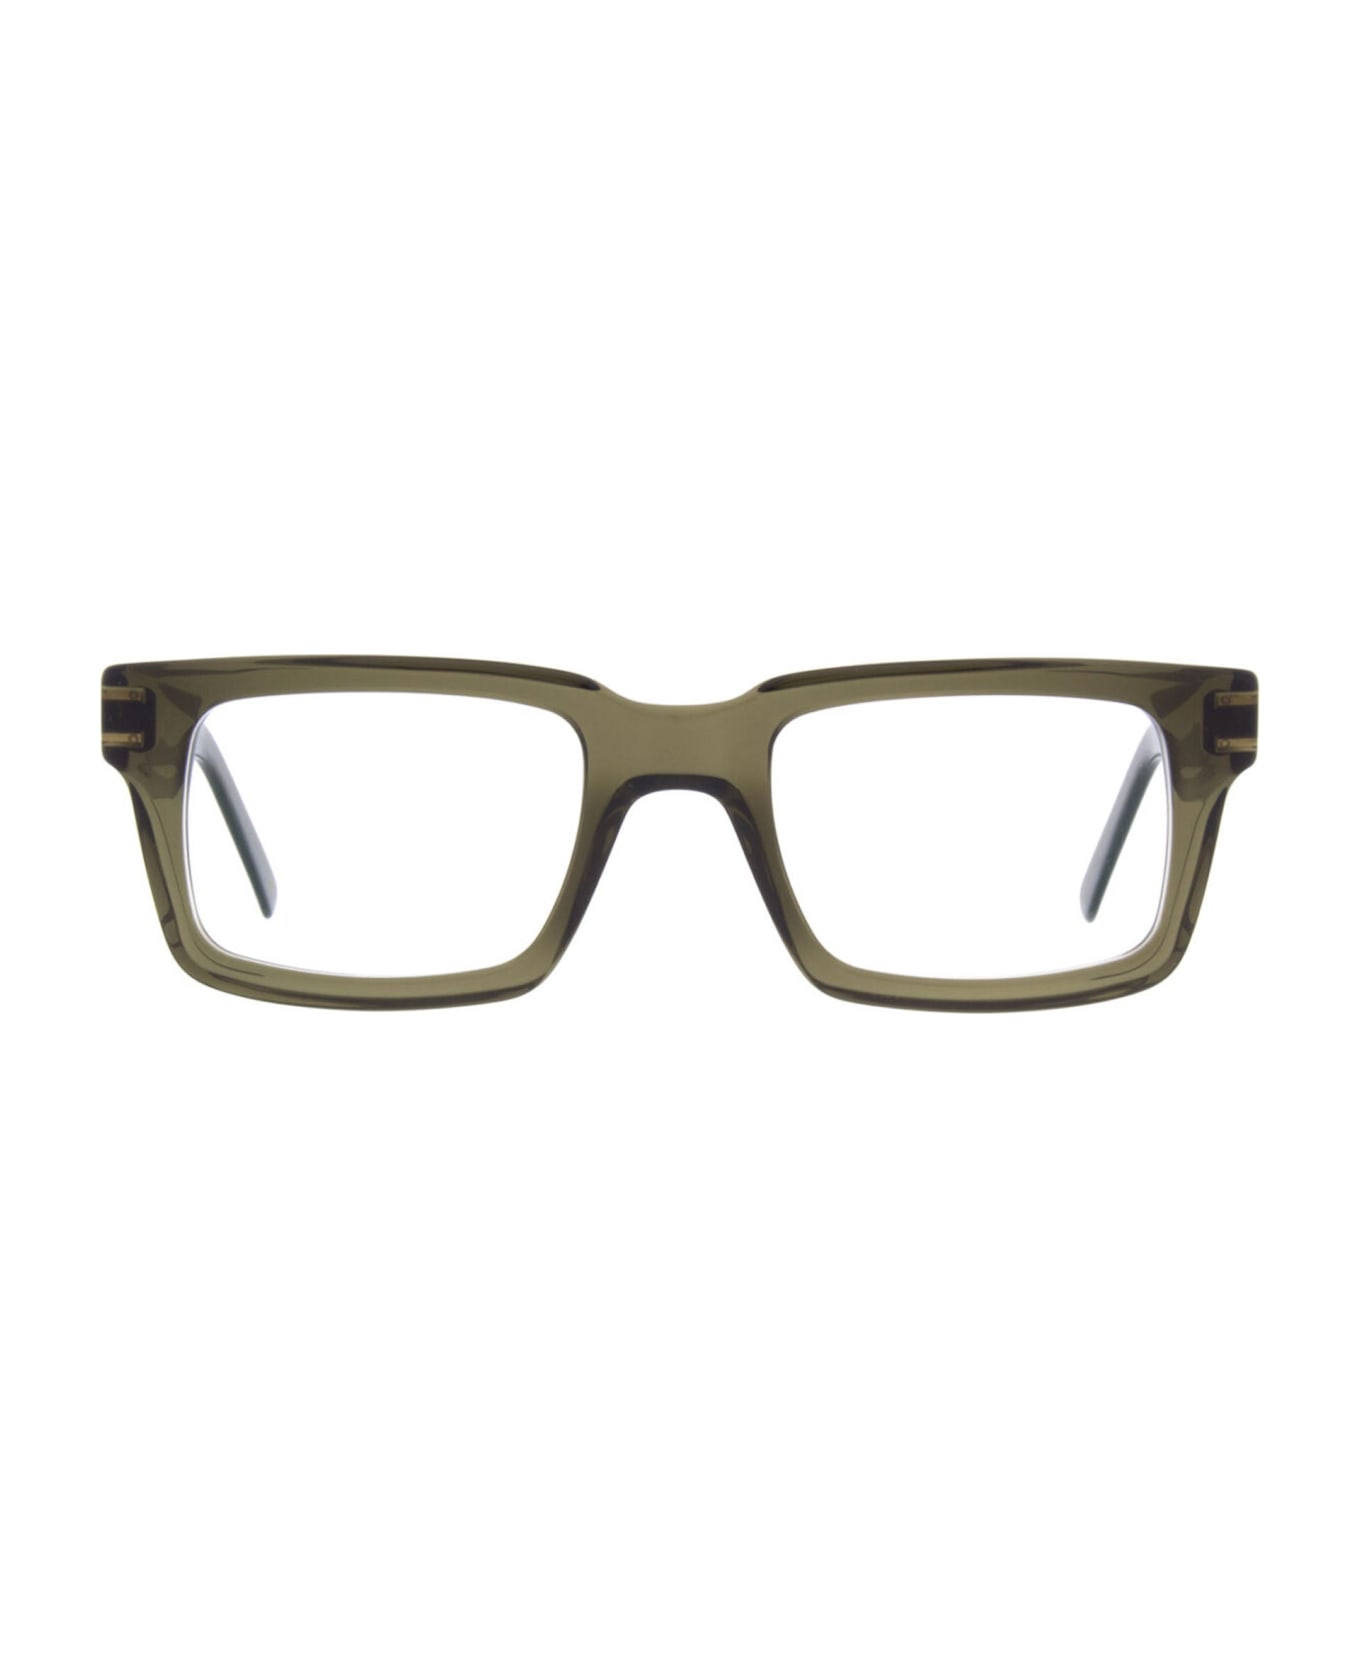 Andy Wolf Aw04 - Green Glasses - green アイウェア